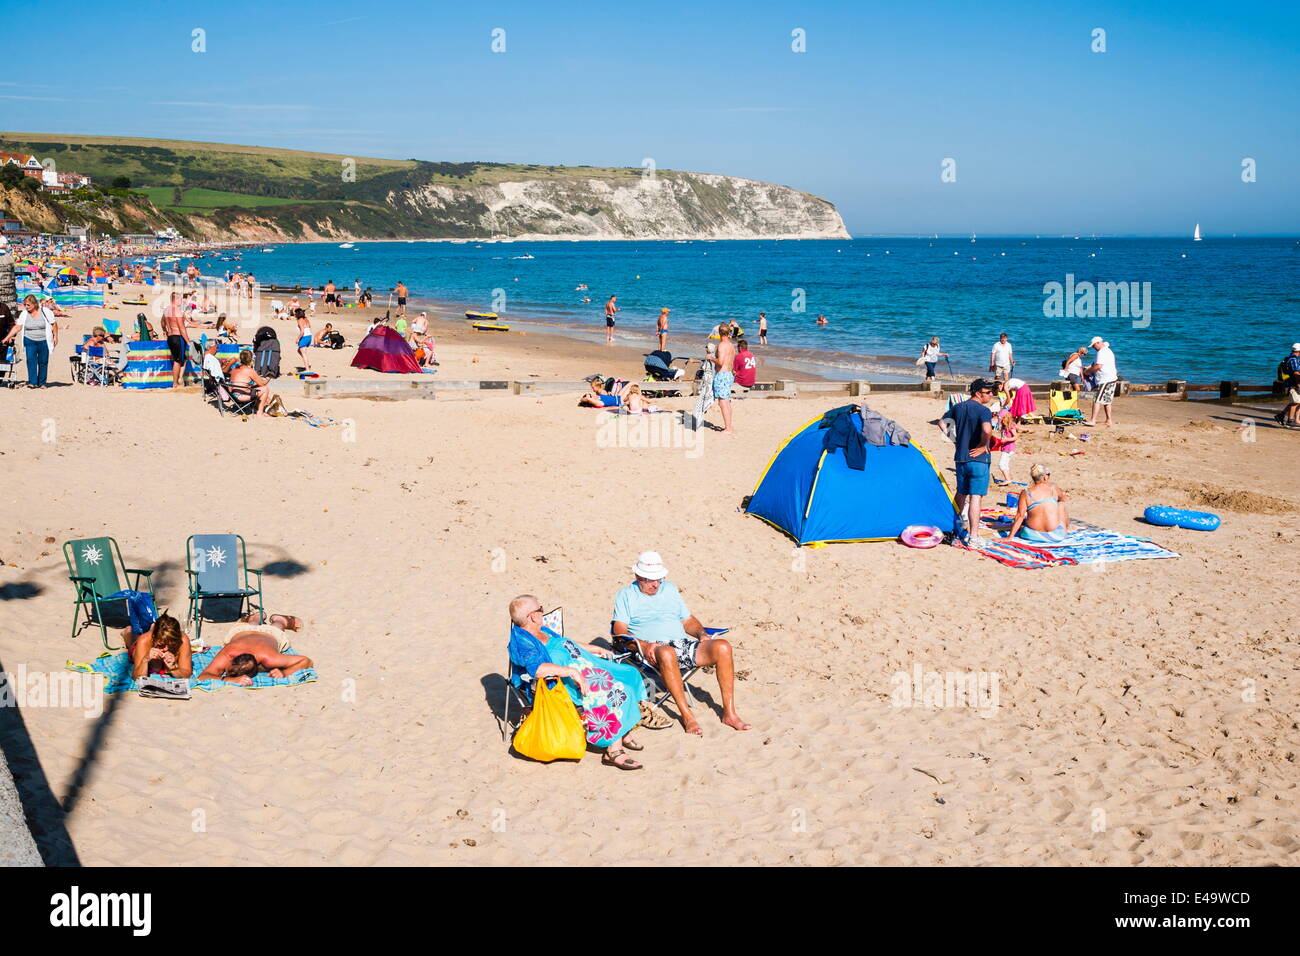 Beach and white cliffs in summer, Swanage, Dorset, England, United Kingdom, Europe Stock Photo